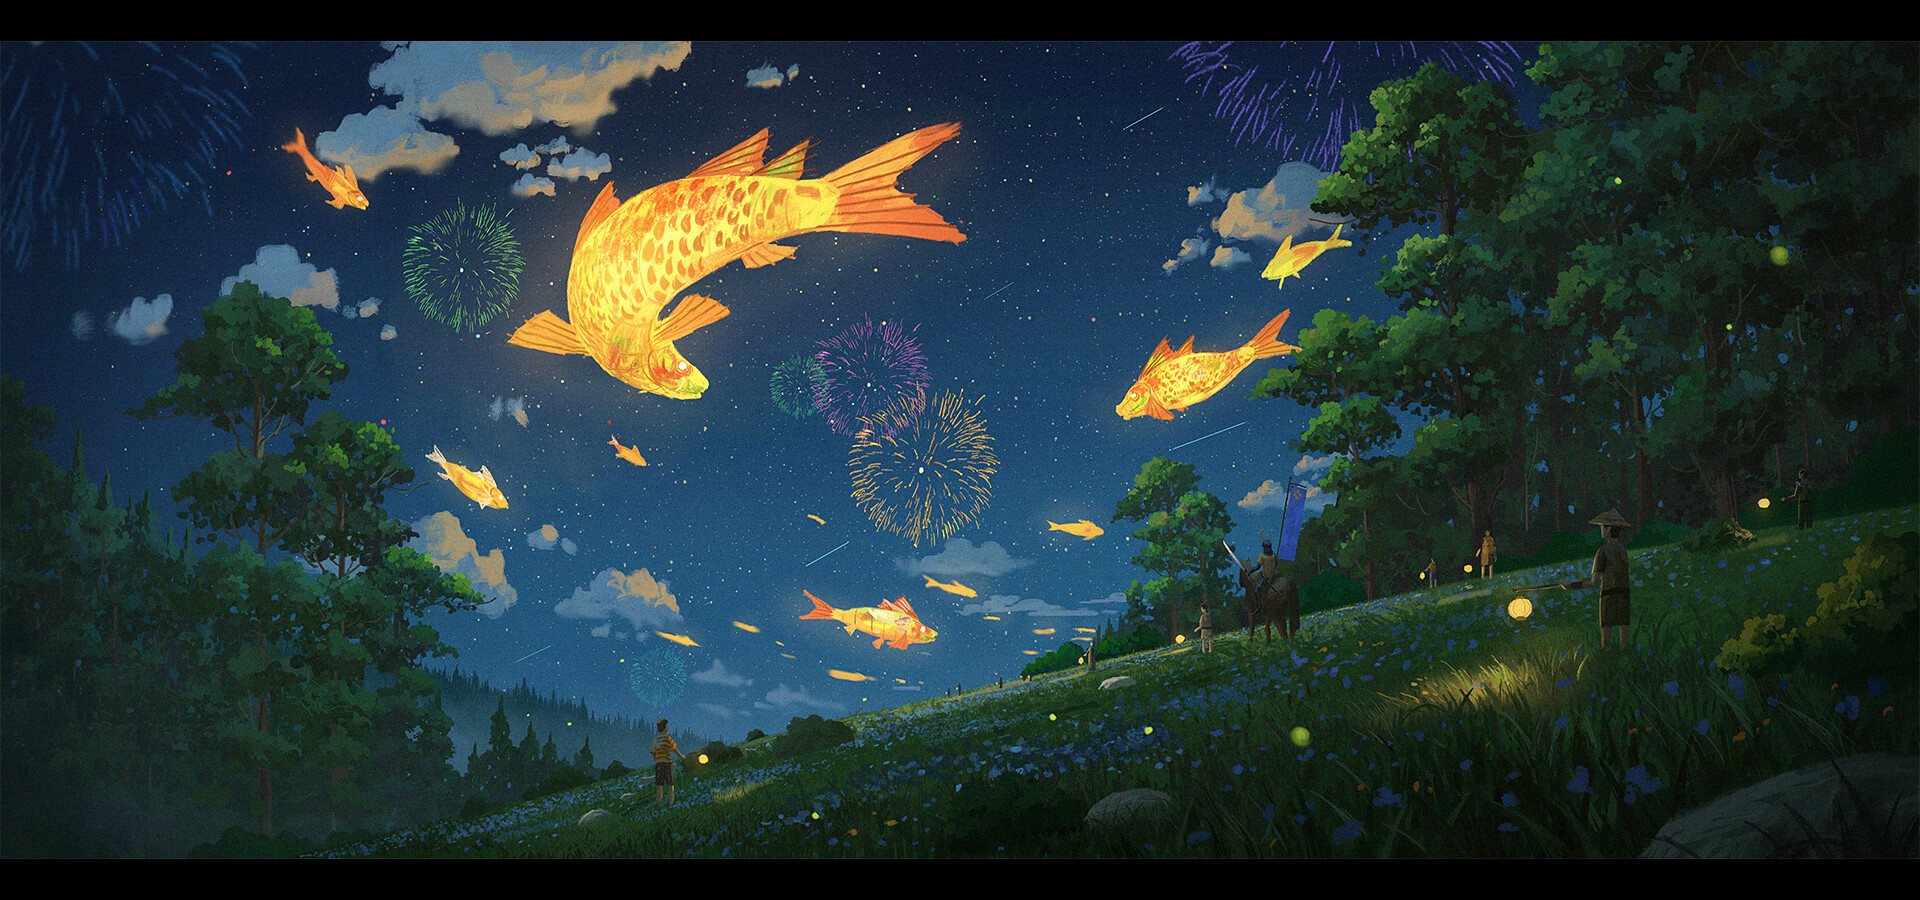 General 1920x900 concept art digital art environment night fish fireworks surreal fantastic realism sky stars trees animals leaves flowers clouds forest nature